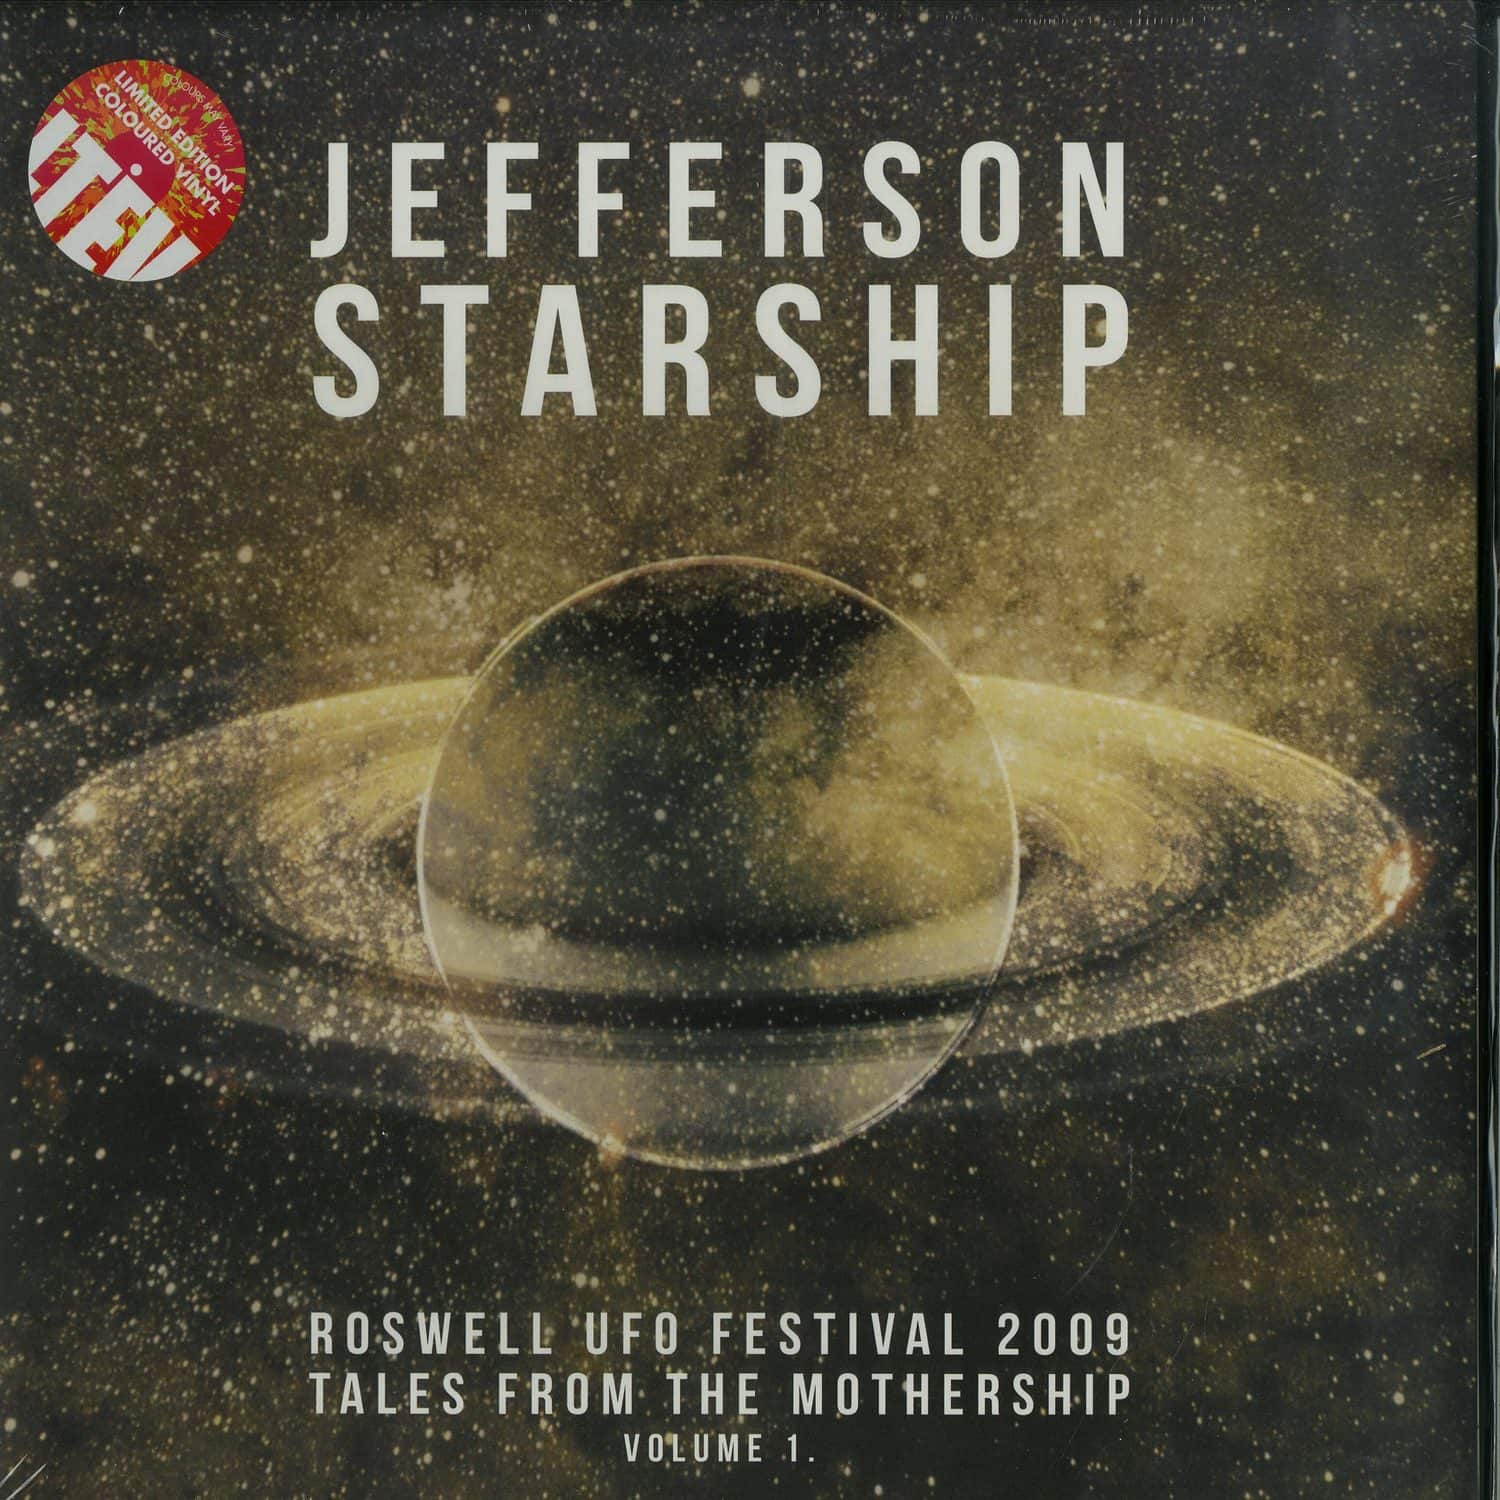 Jefferson Starship - ROSWELL UFO FESTIVAL 2009 - TALES FROM THE MOTHERSHIP VOLUME 1  